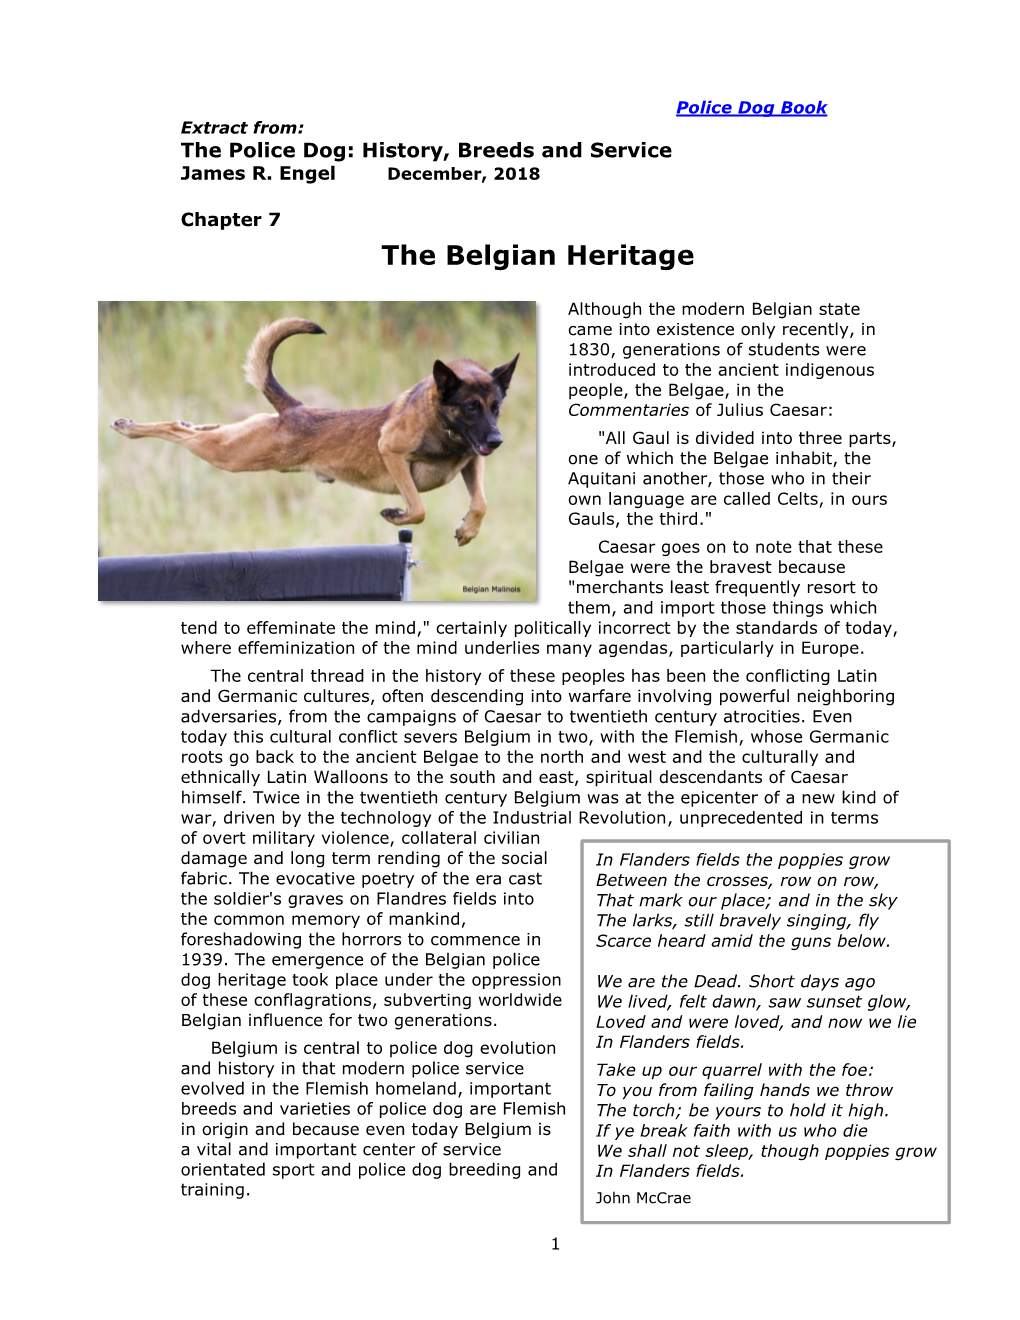 From the Police Dog Book: the Belgian Heritage Jim Engel